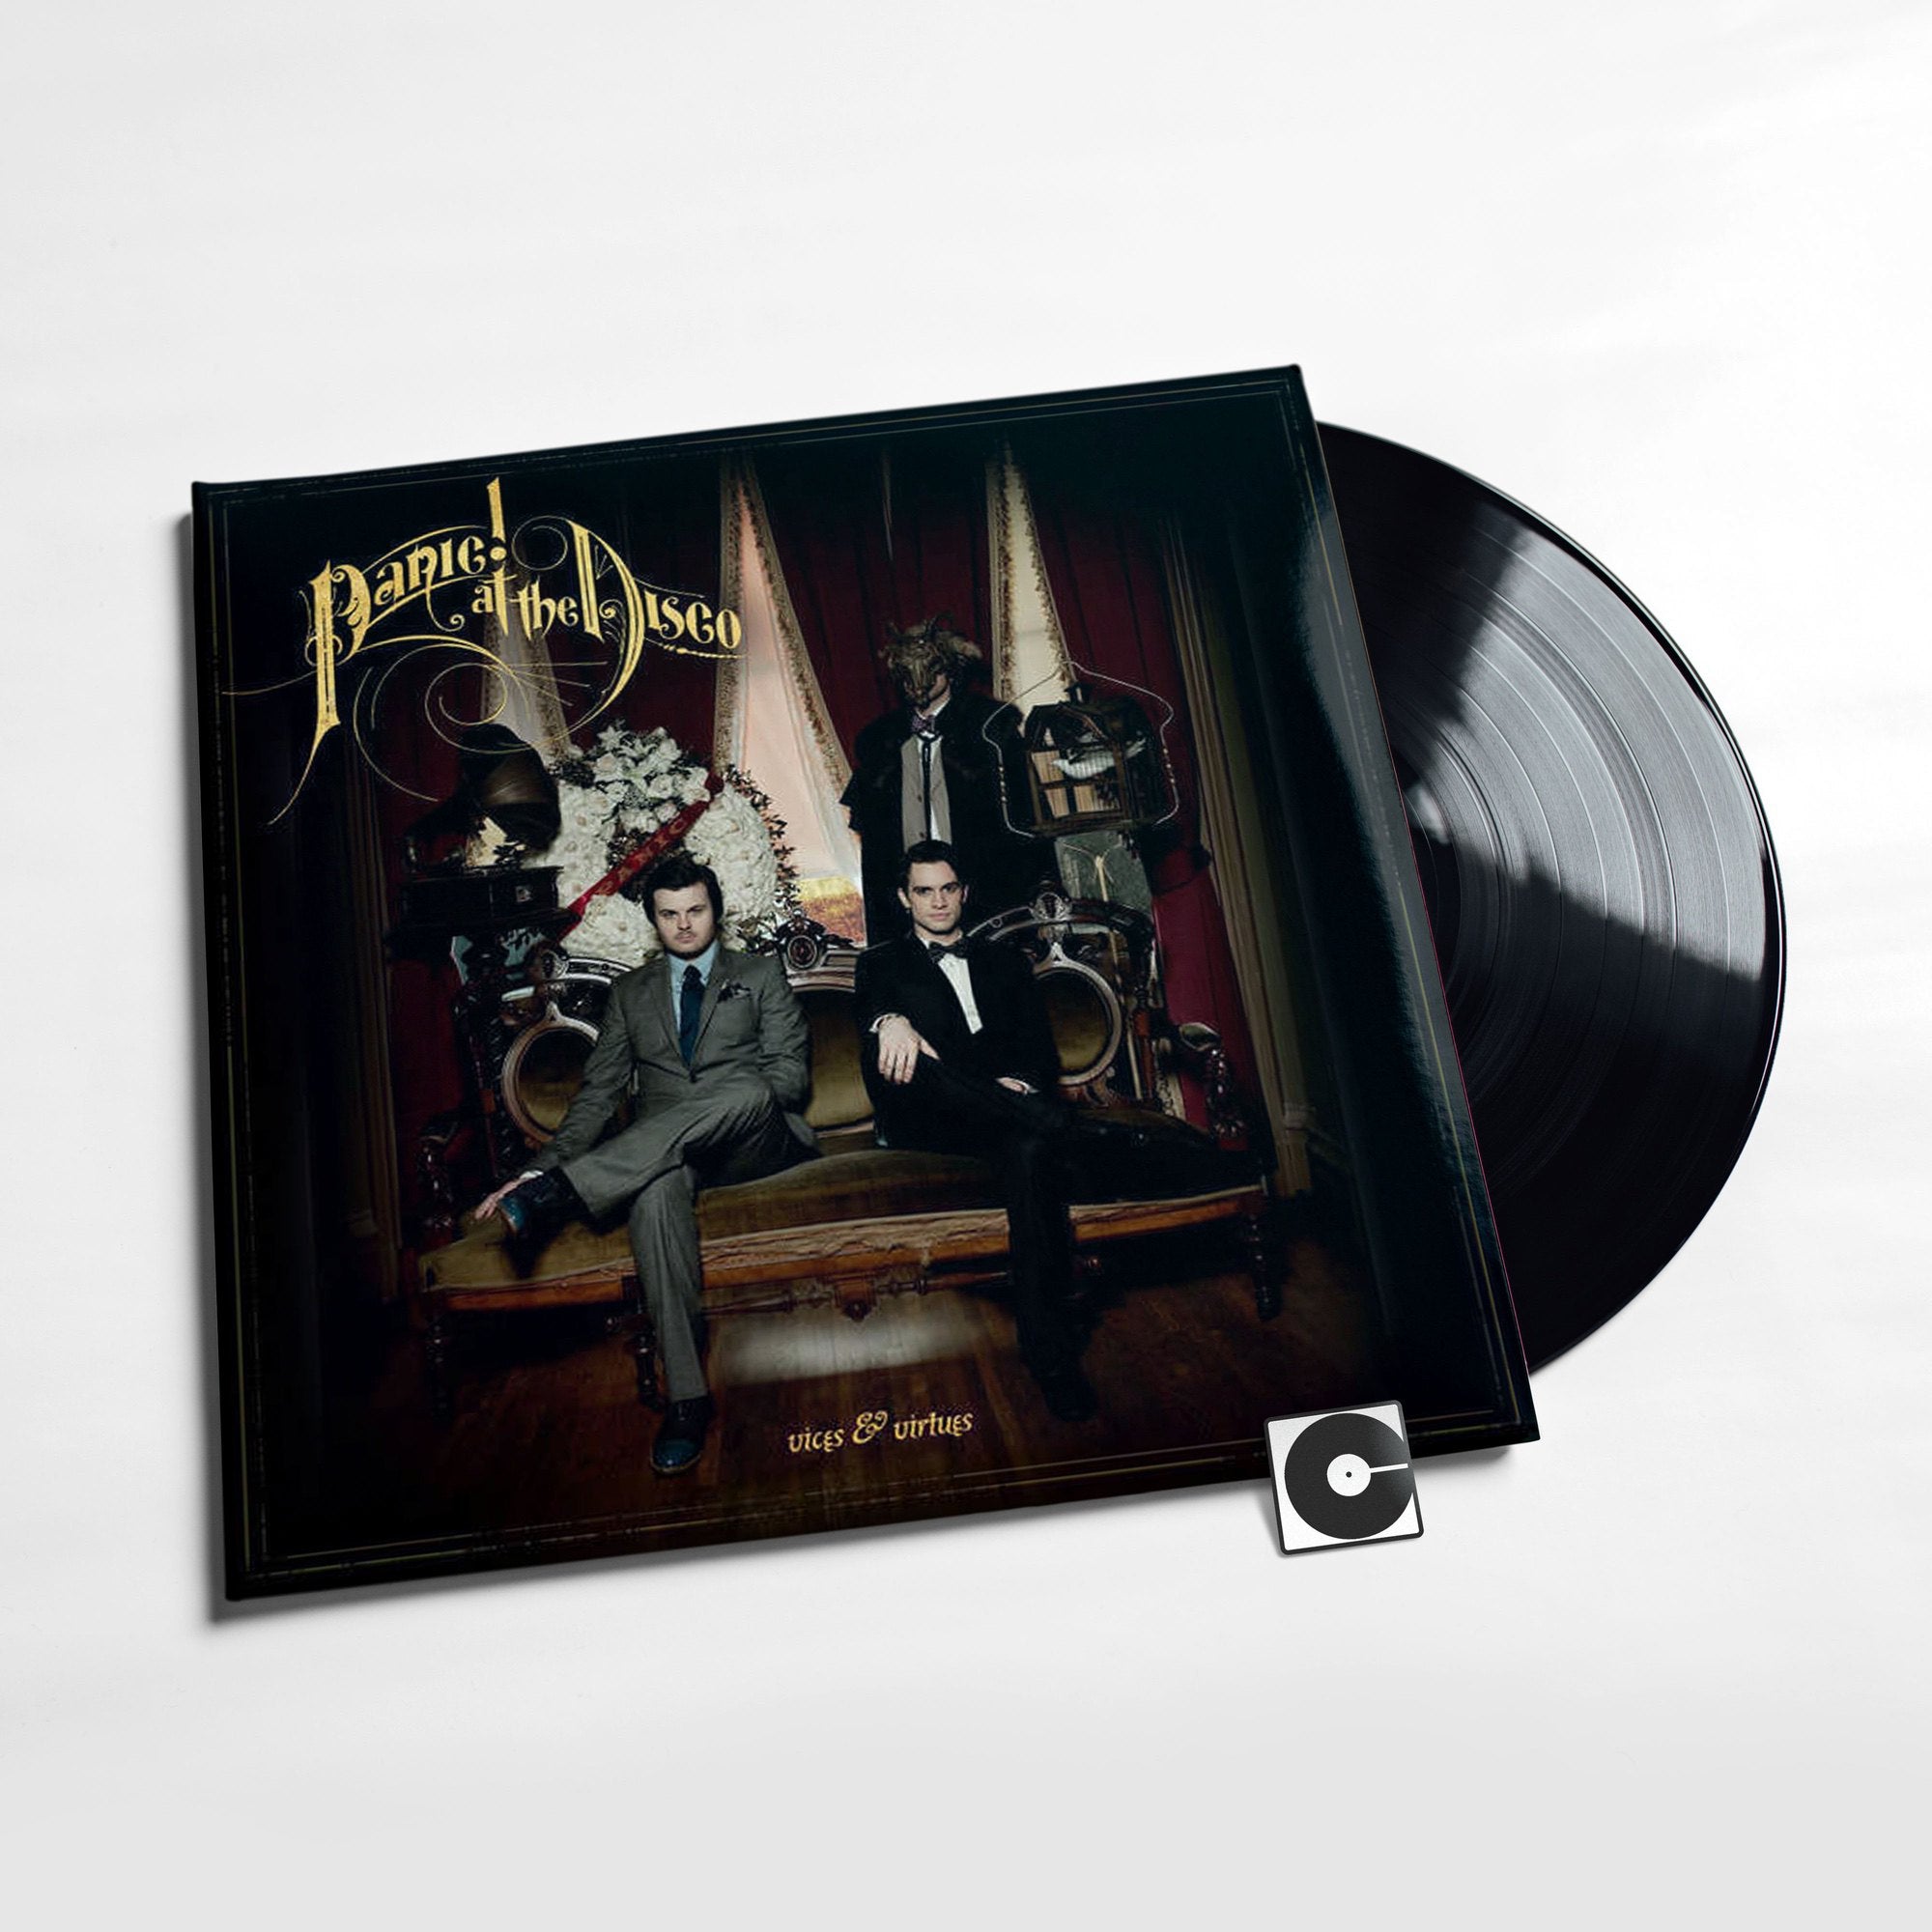 Panic! At The Disco – Vices Virtues (Deluxe) Playlist By, 47% OFF